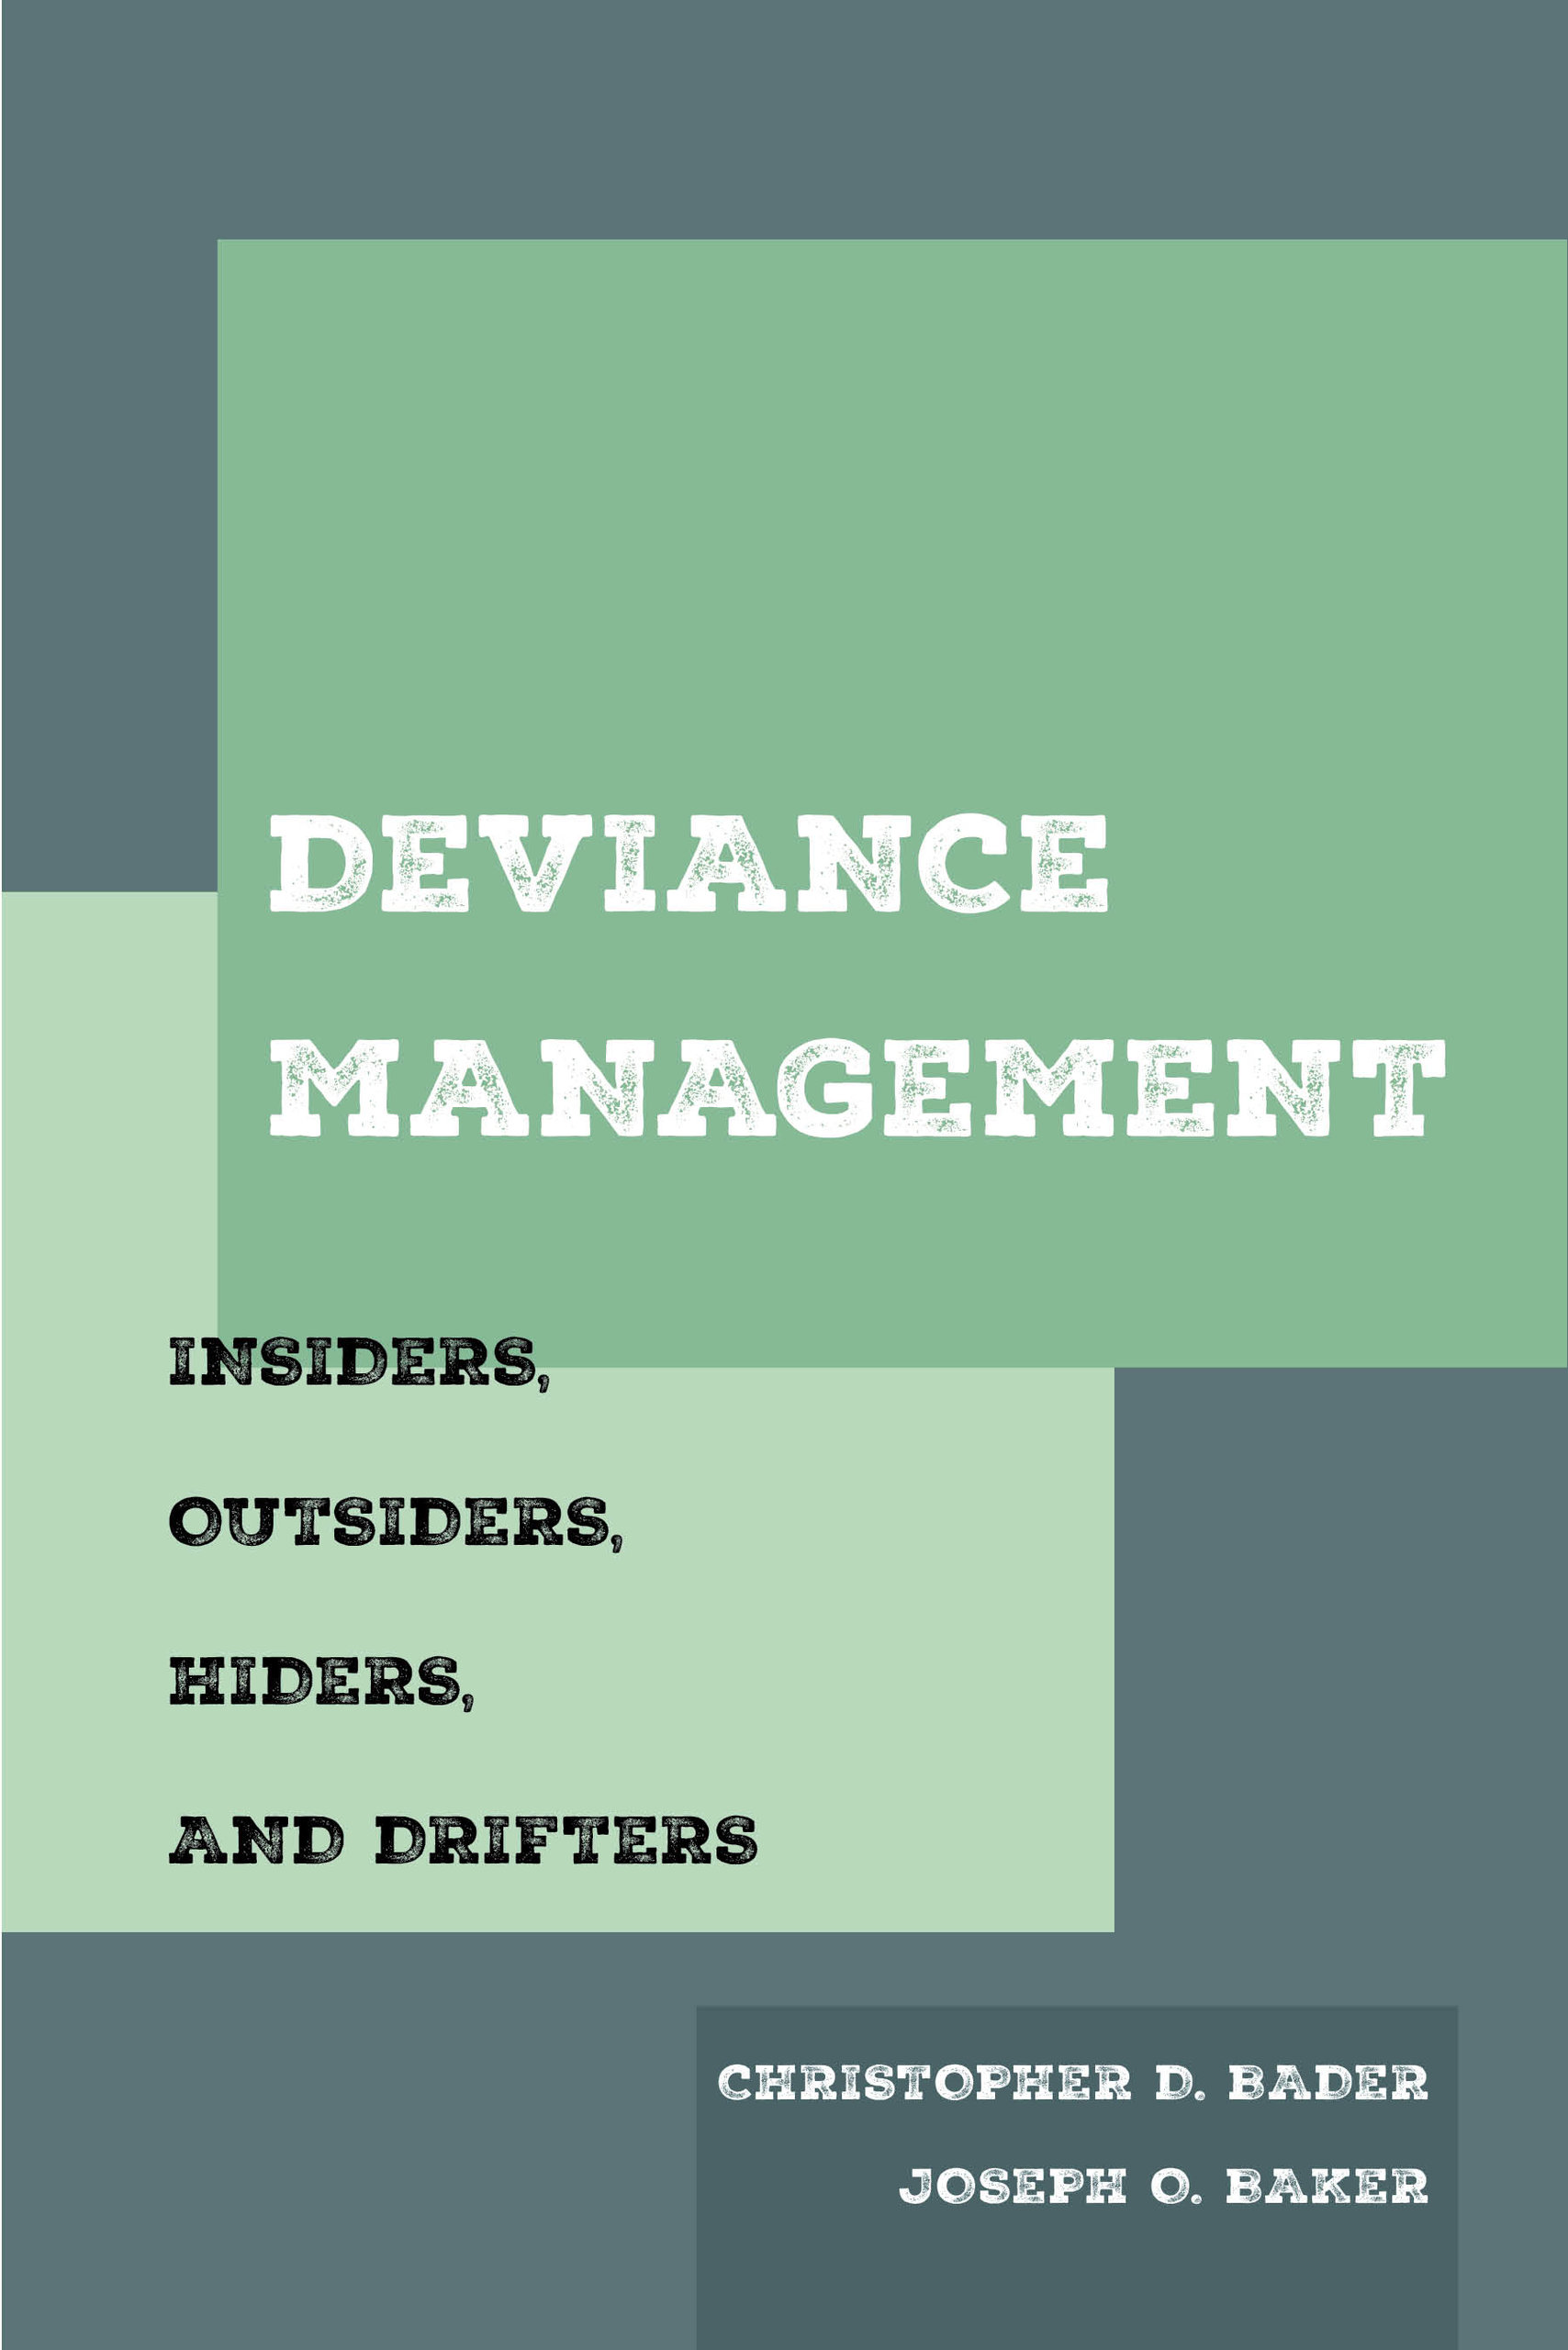 Deviance Management - Insiders, Outsiders, Hiders, and Drifters